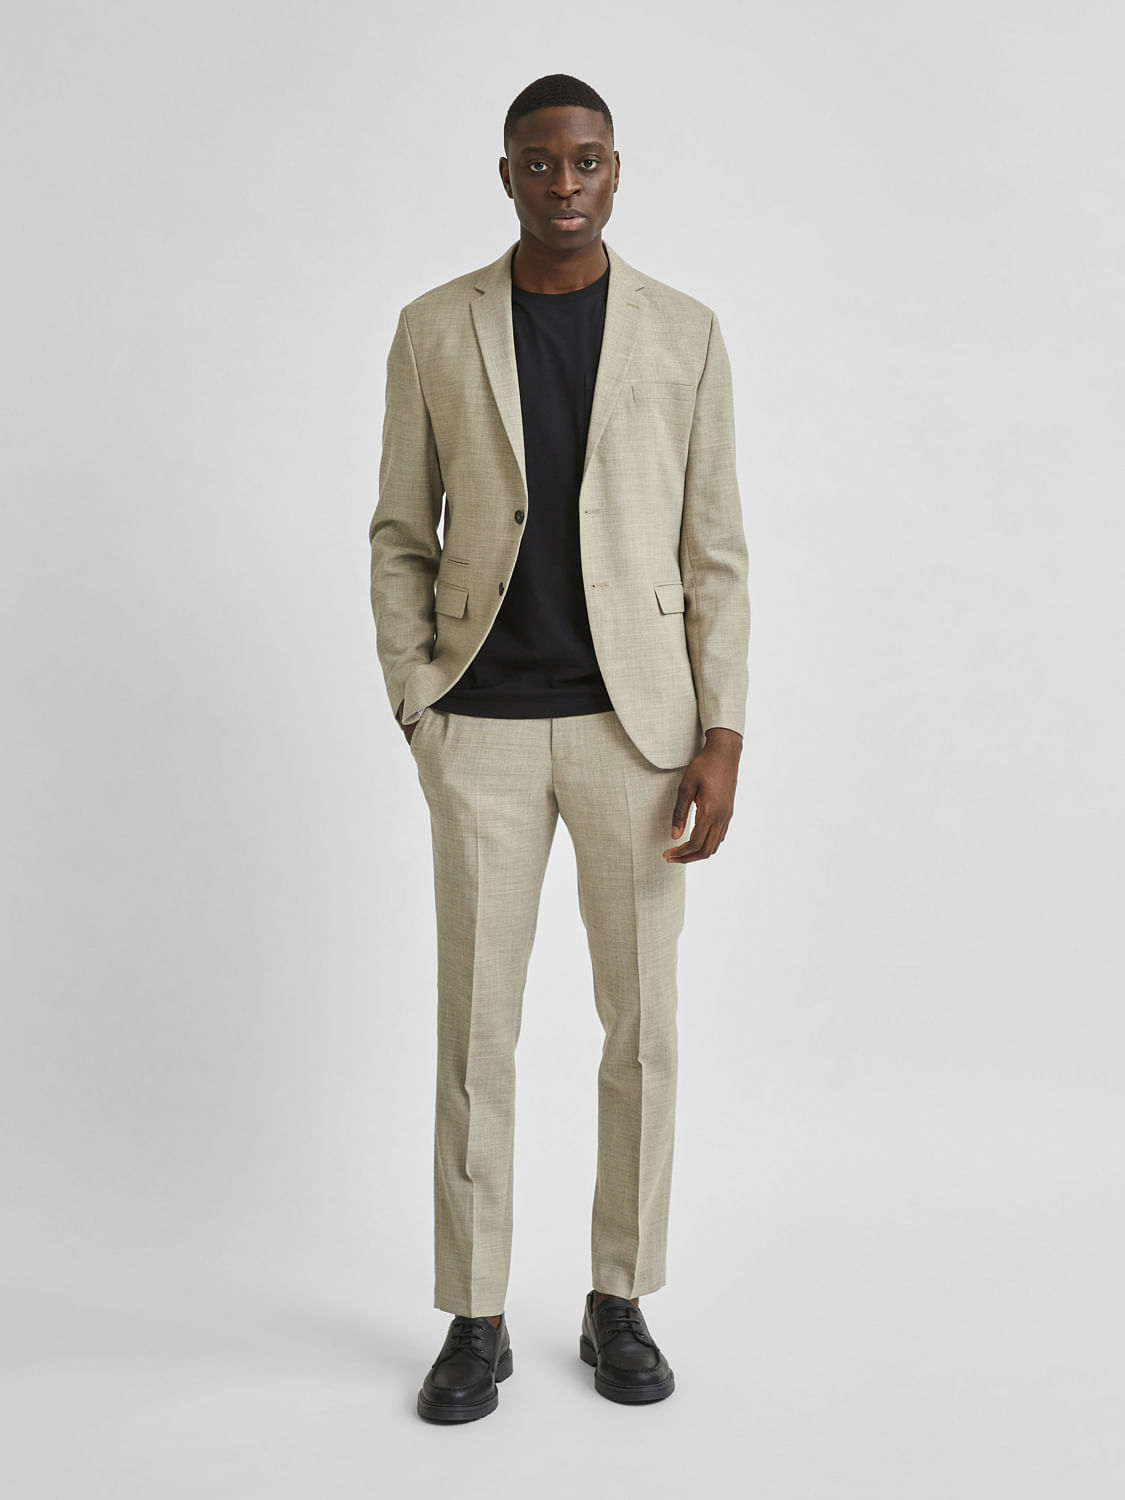 Skinny Fit Suits & Separates for Young Adult Men | Nordstrom